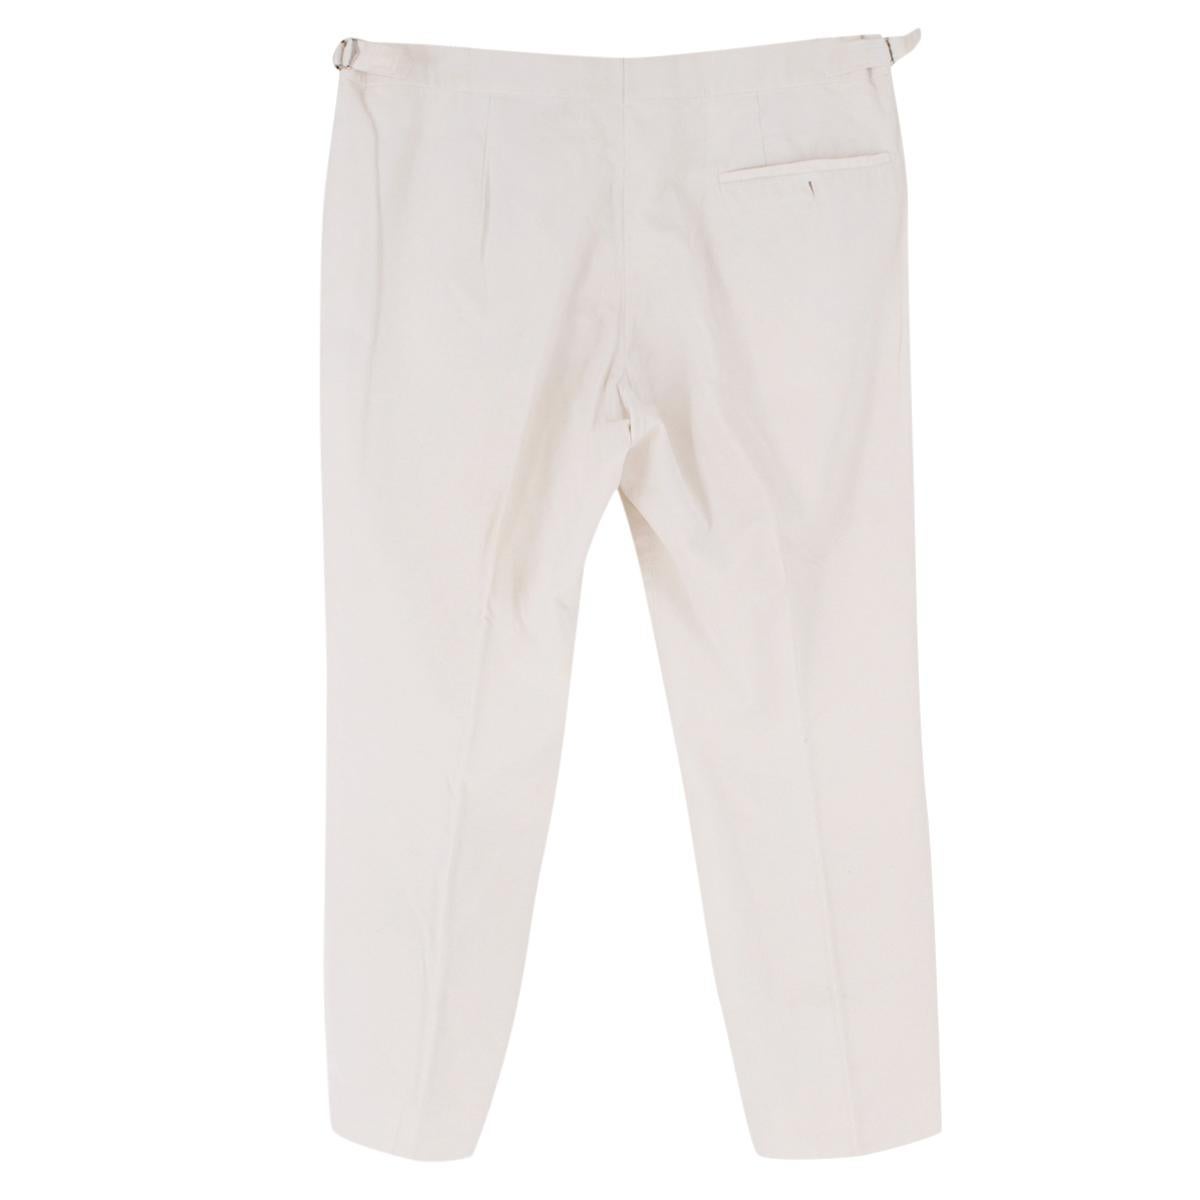 Hardy Amies white corduroy trousers
 
 - Cream trouser
 - Lightweight
 - Mid-rise waist
 - Straight leg
 - Front side pockets
 - Back slip pockets
 - Hook and eye fastener
 
 Measurements:
 
 Approx.
 
 Waist: 47cm
 Length: 95 cm